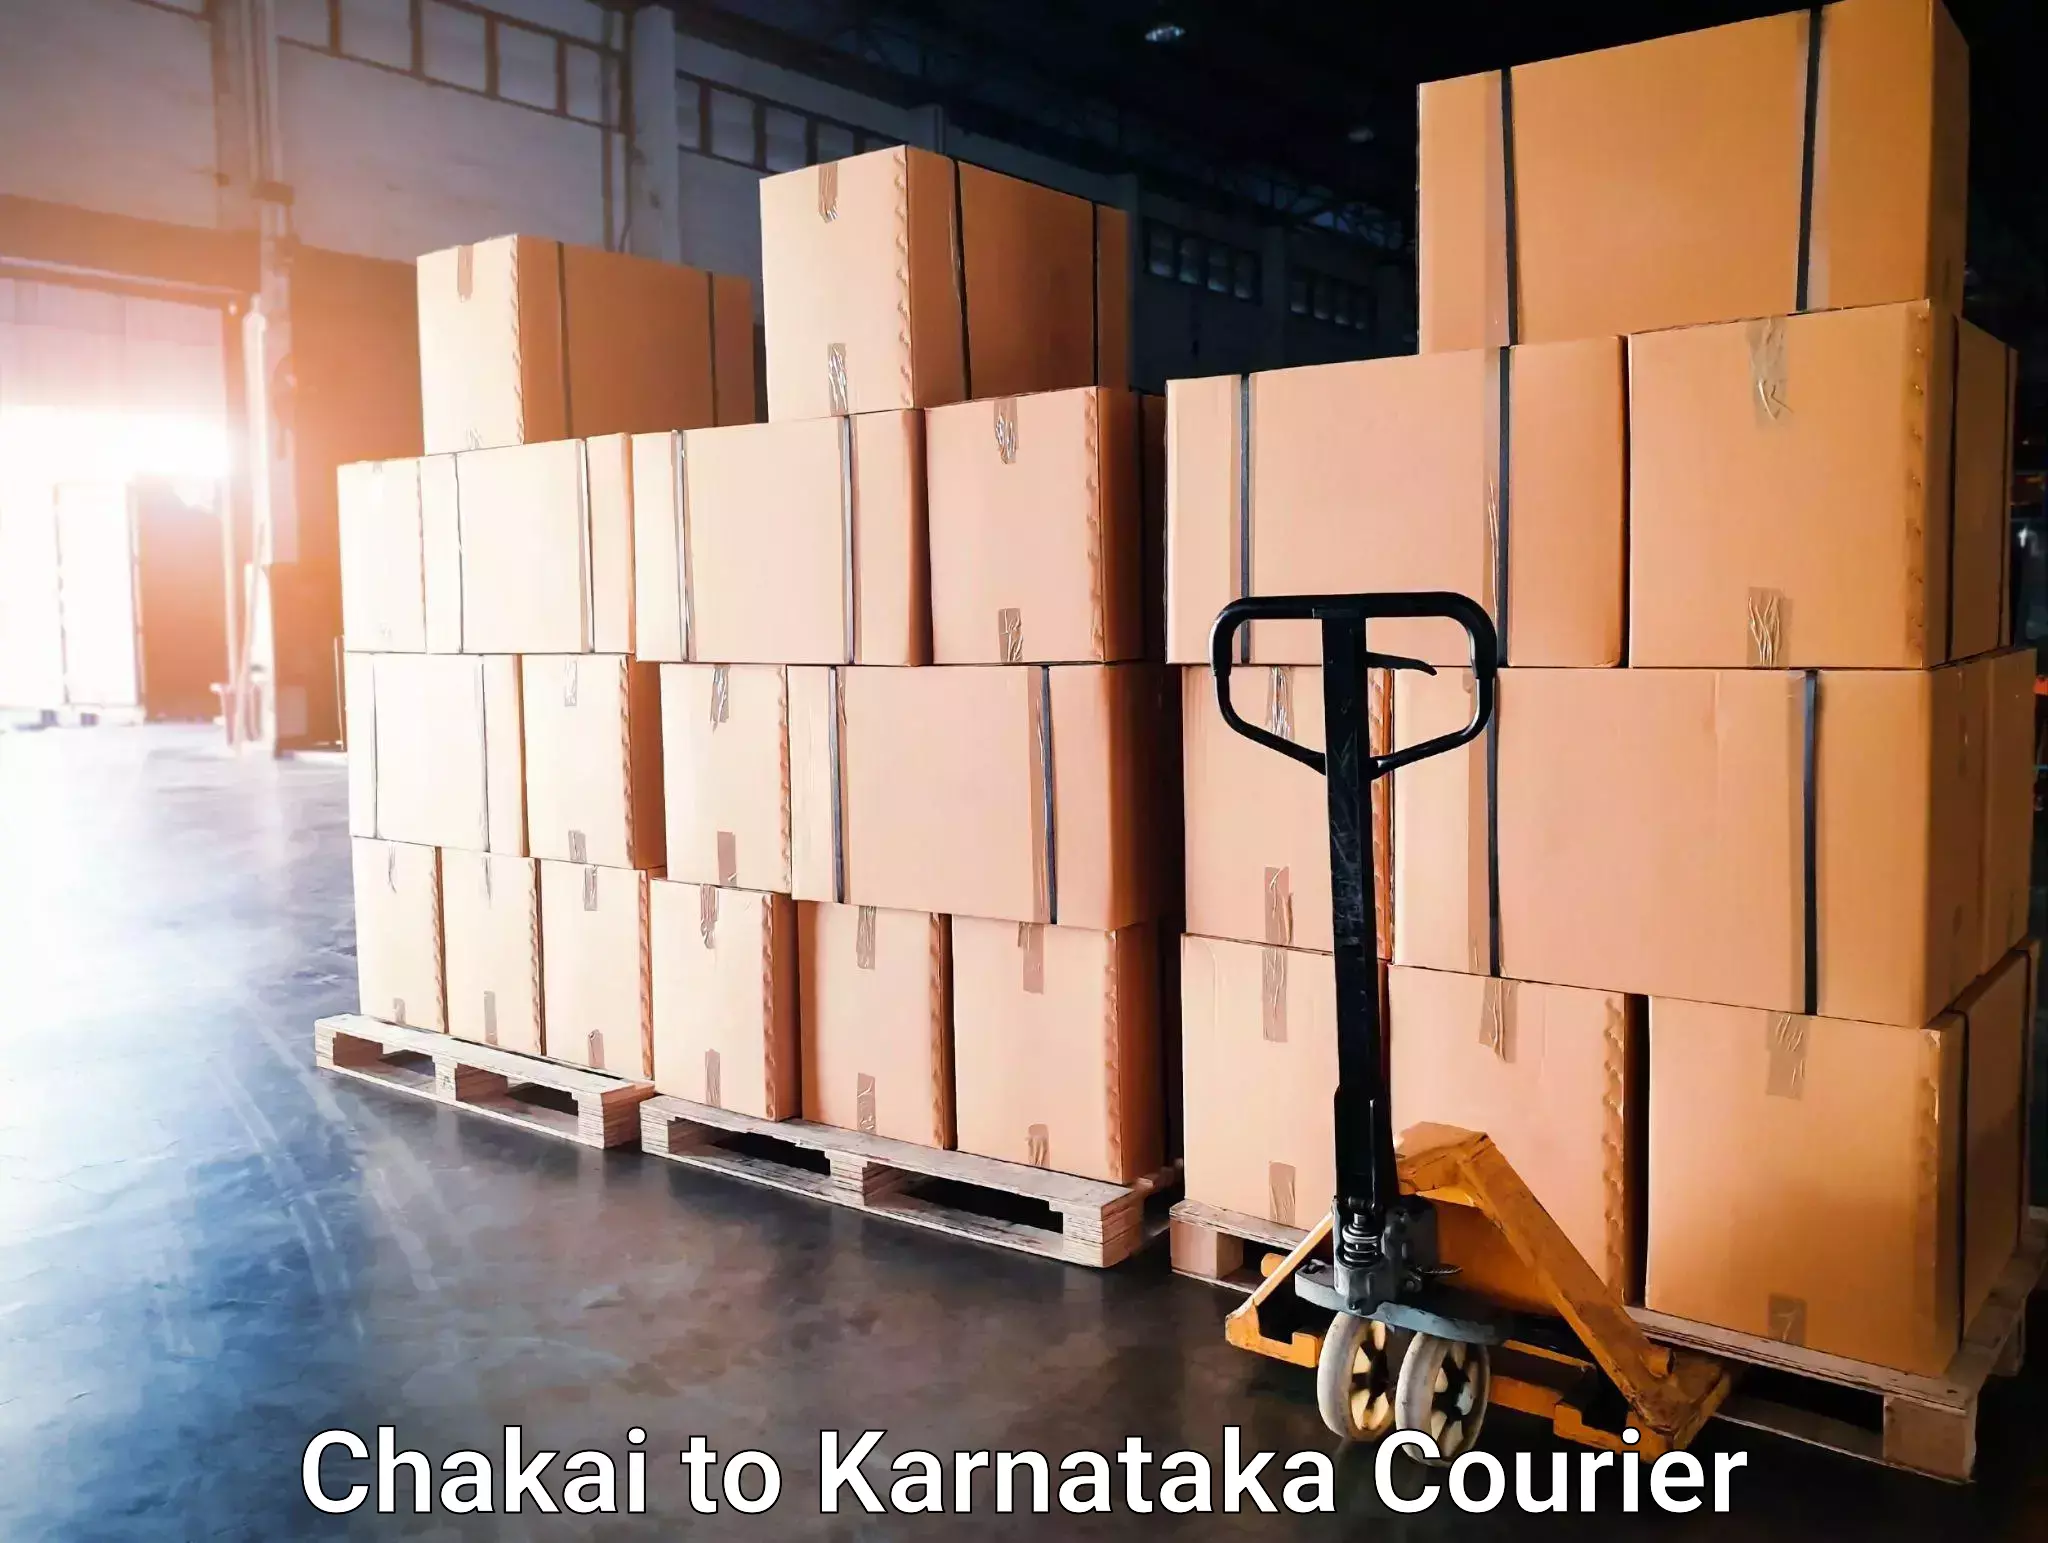 Furniture transport specialists Chakai to Manipal Academy of Higher Education